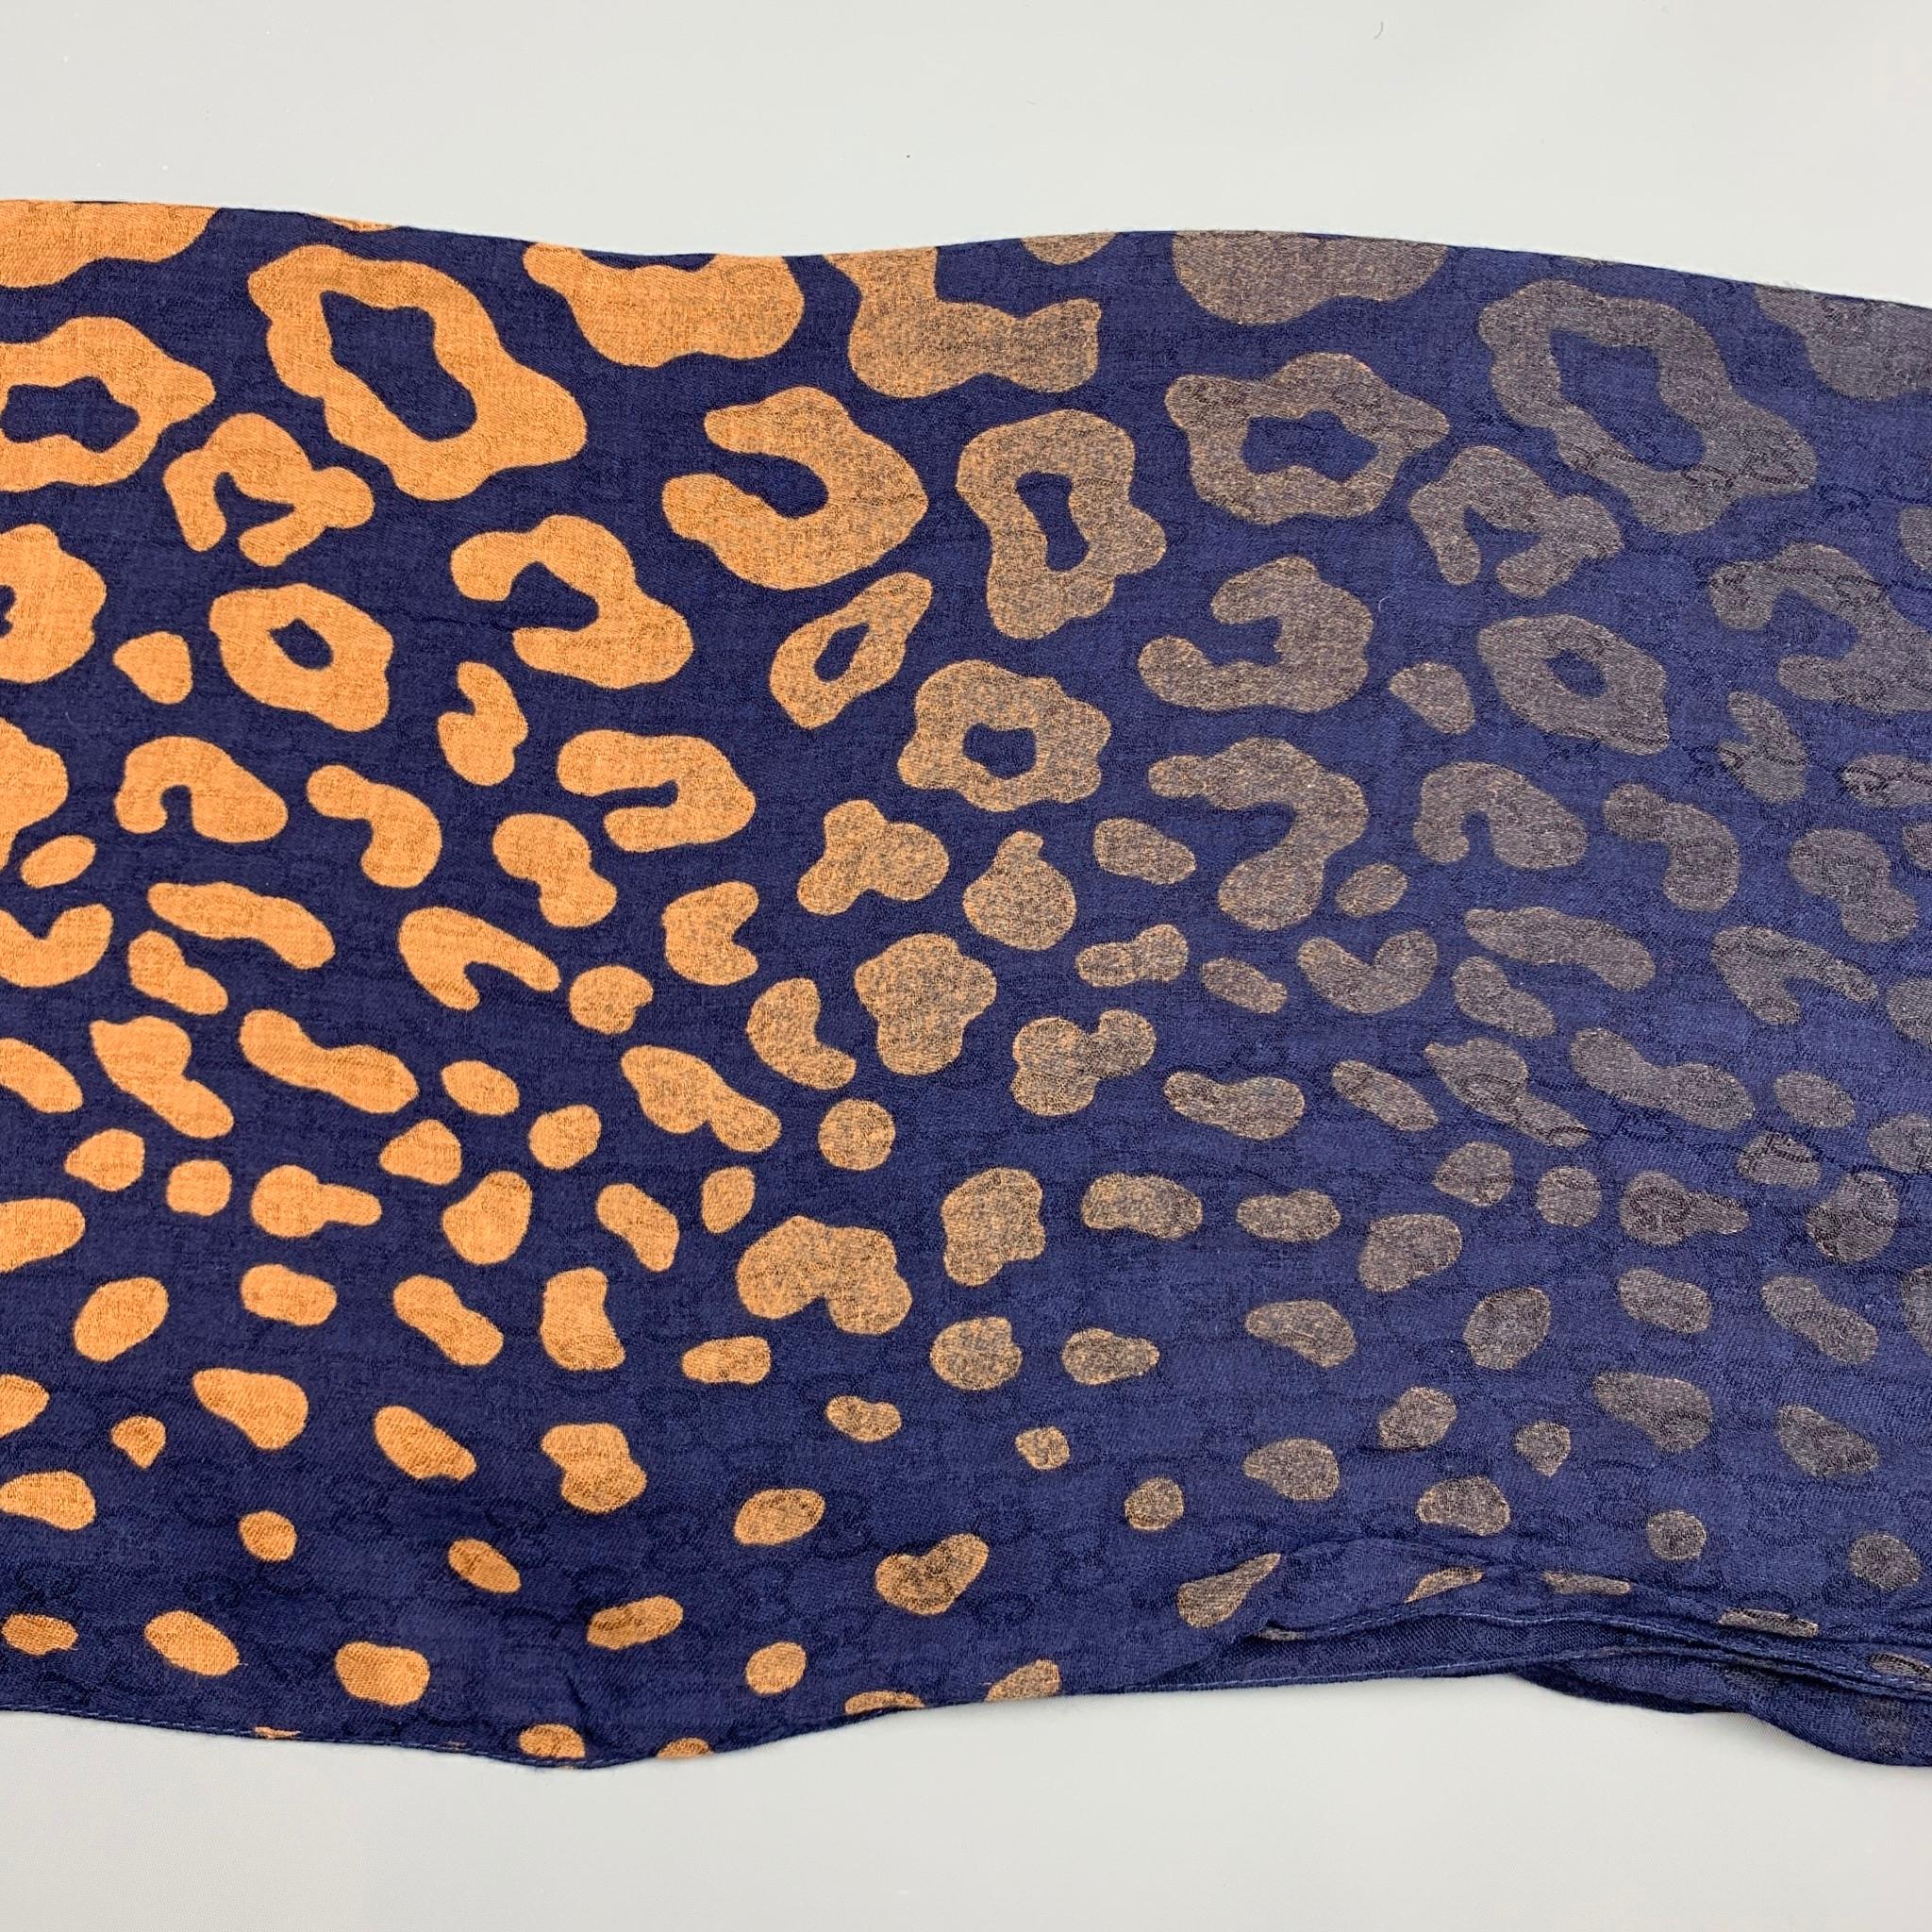 GUCCI scarf comes in a navy & tan faded logo animal print viscose blend with a fringe trim. 

Very Good Pre-Owned Condition.

Measurements:

62 in. x 27 in. 